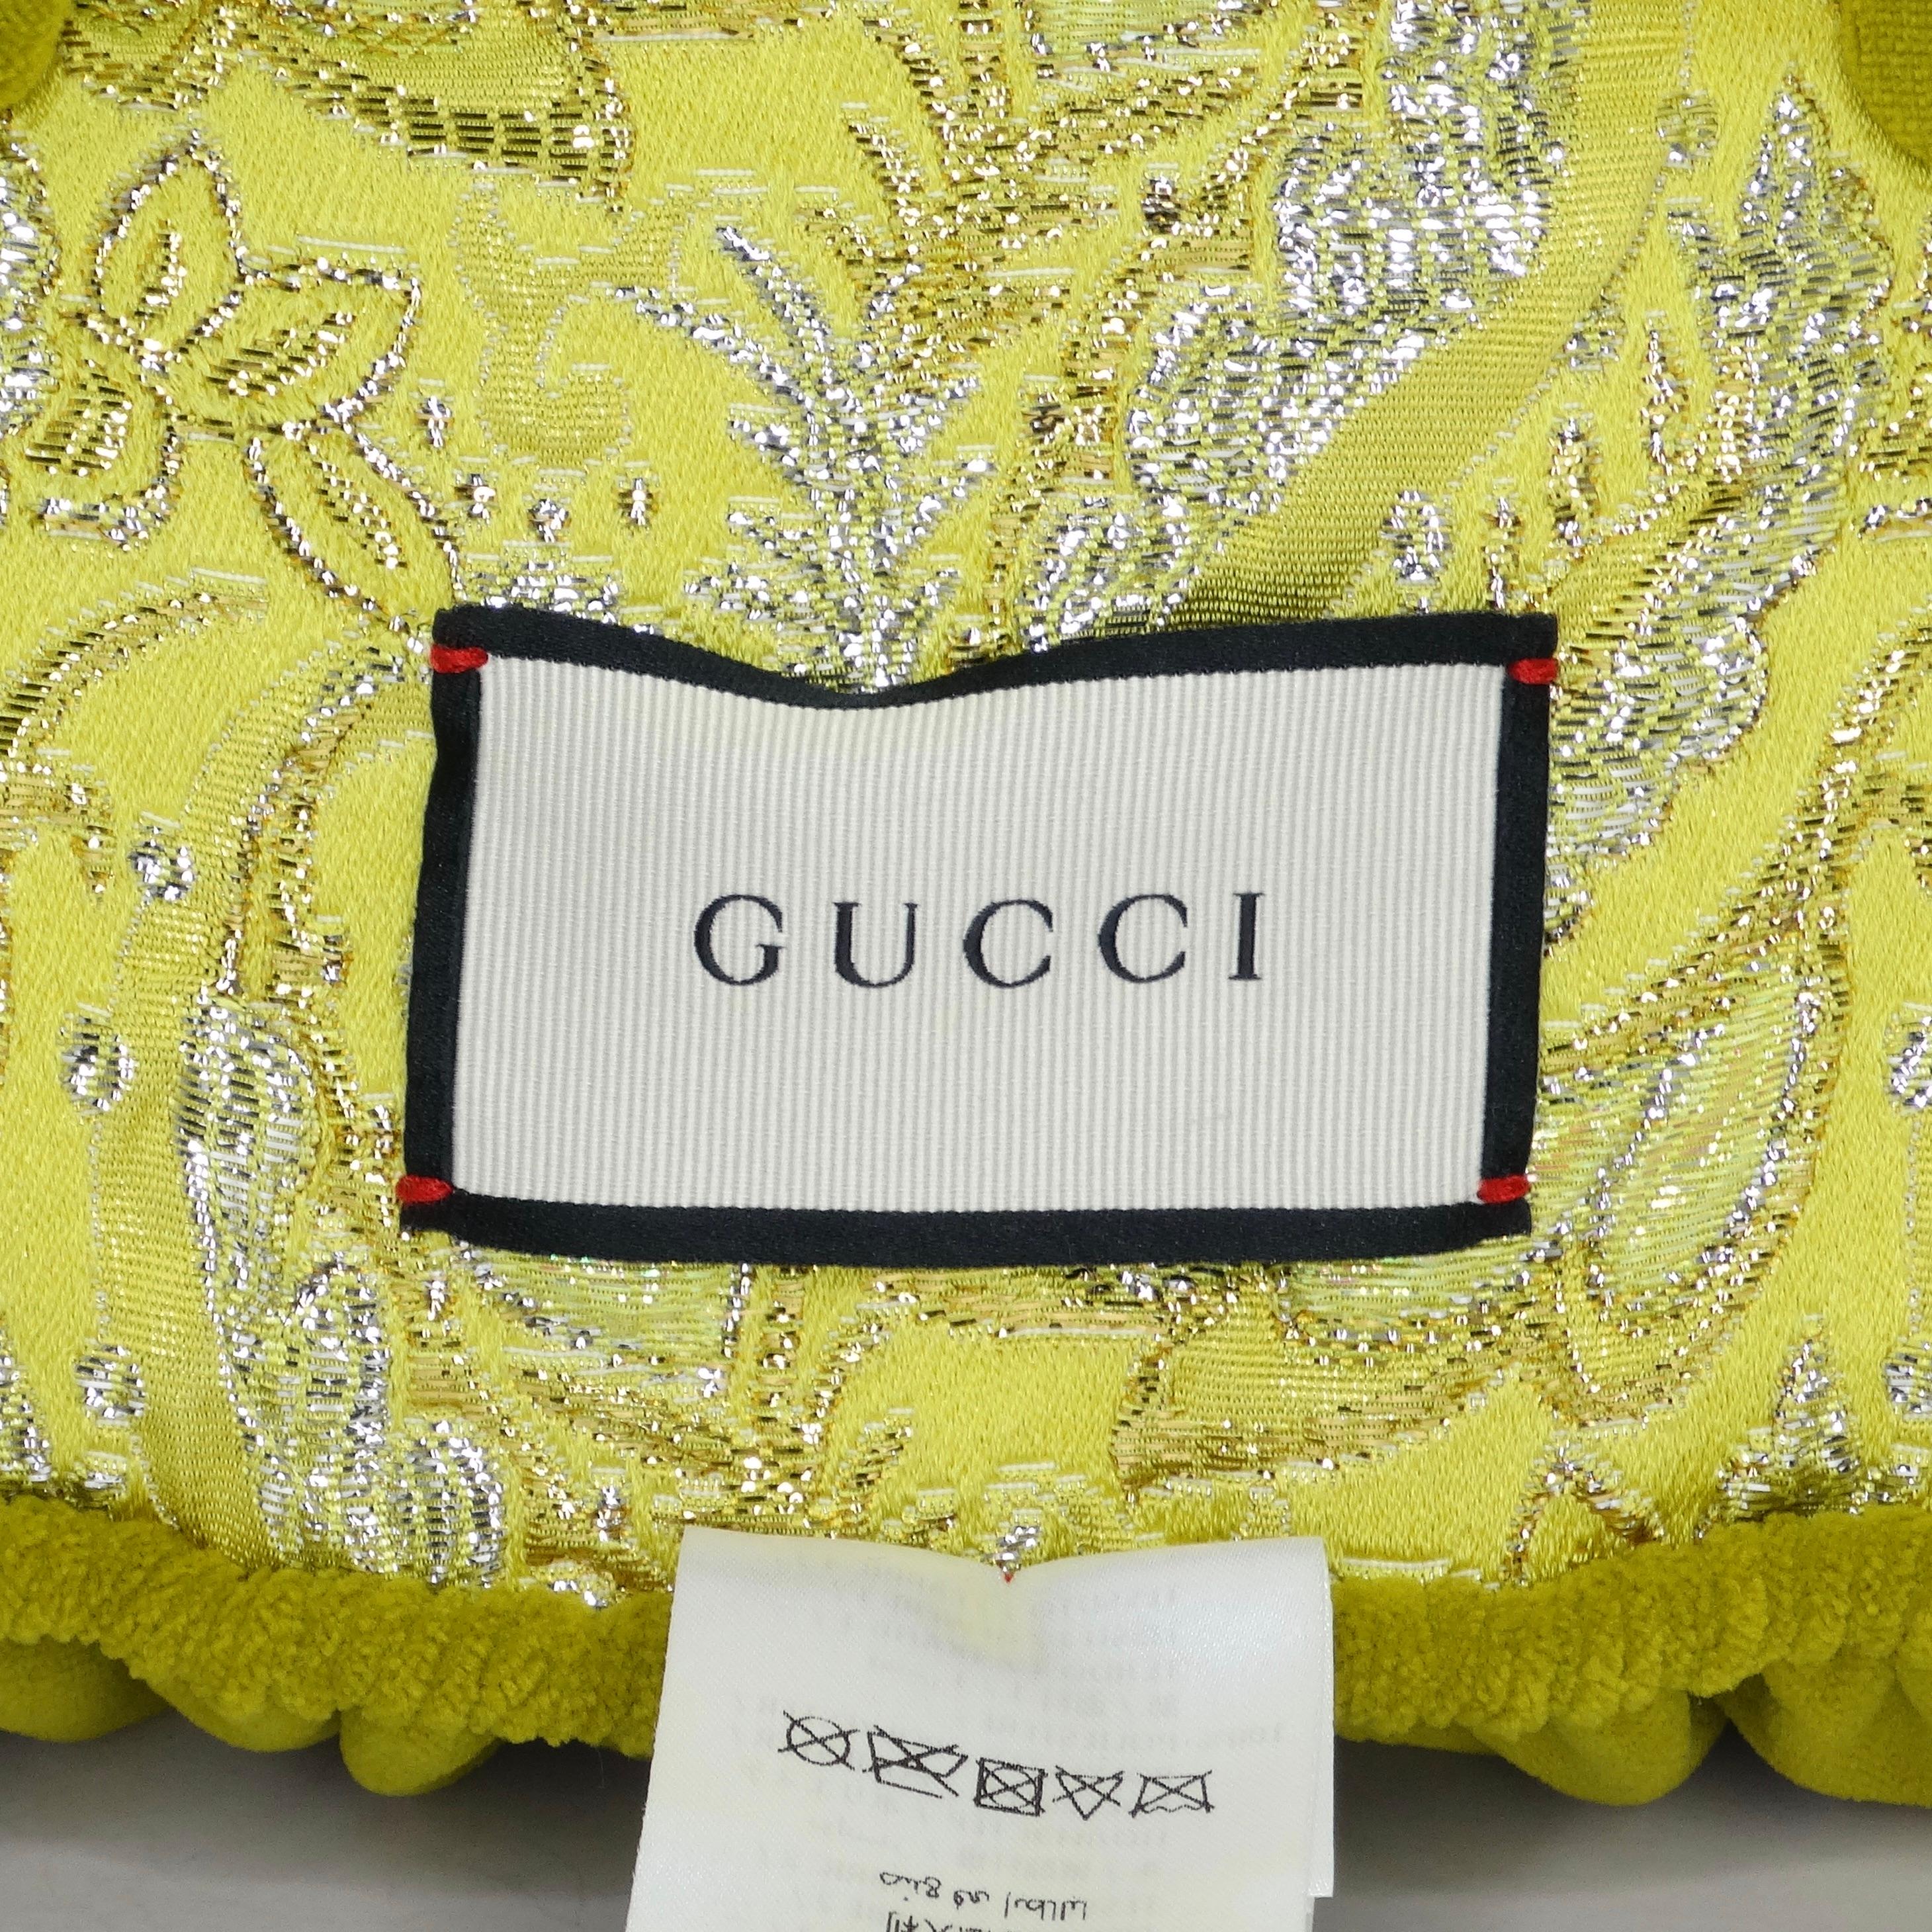 Gucci Embroidered Velvet Yellow Pillow Cushion For Sale 3